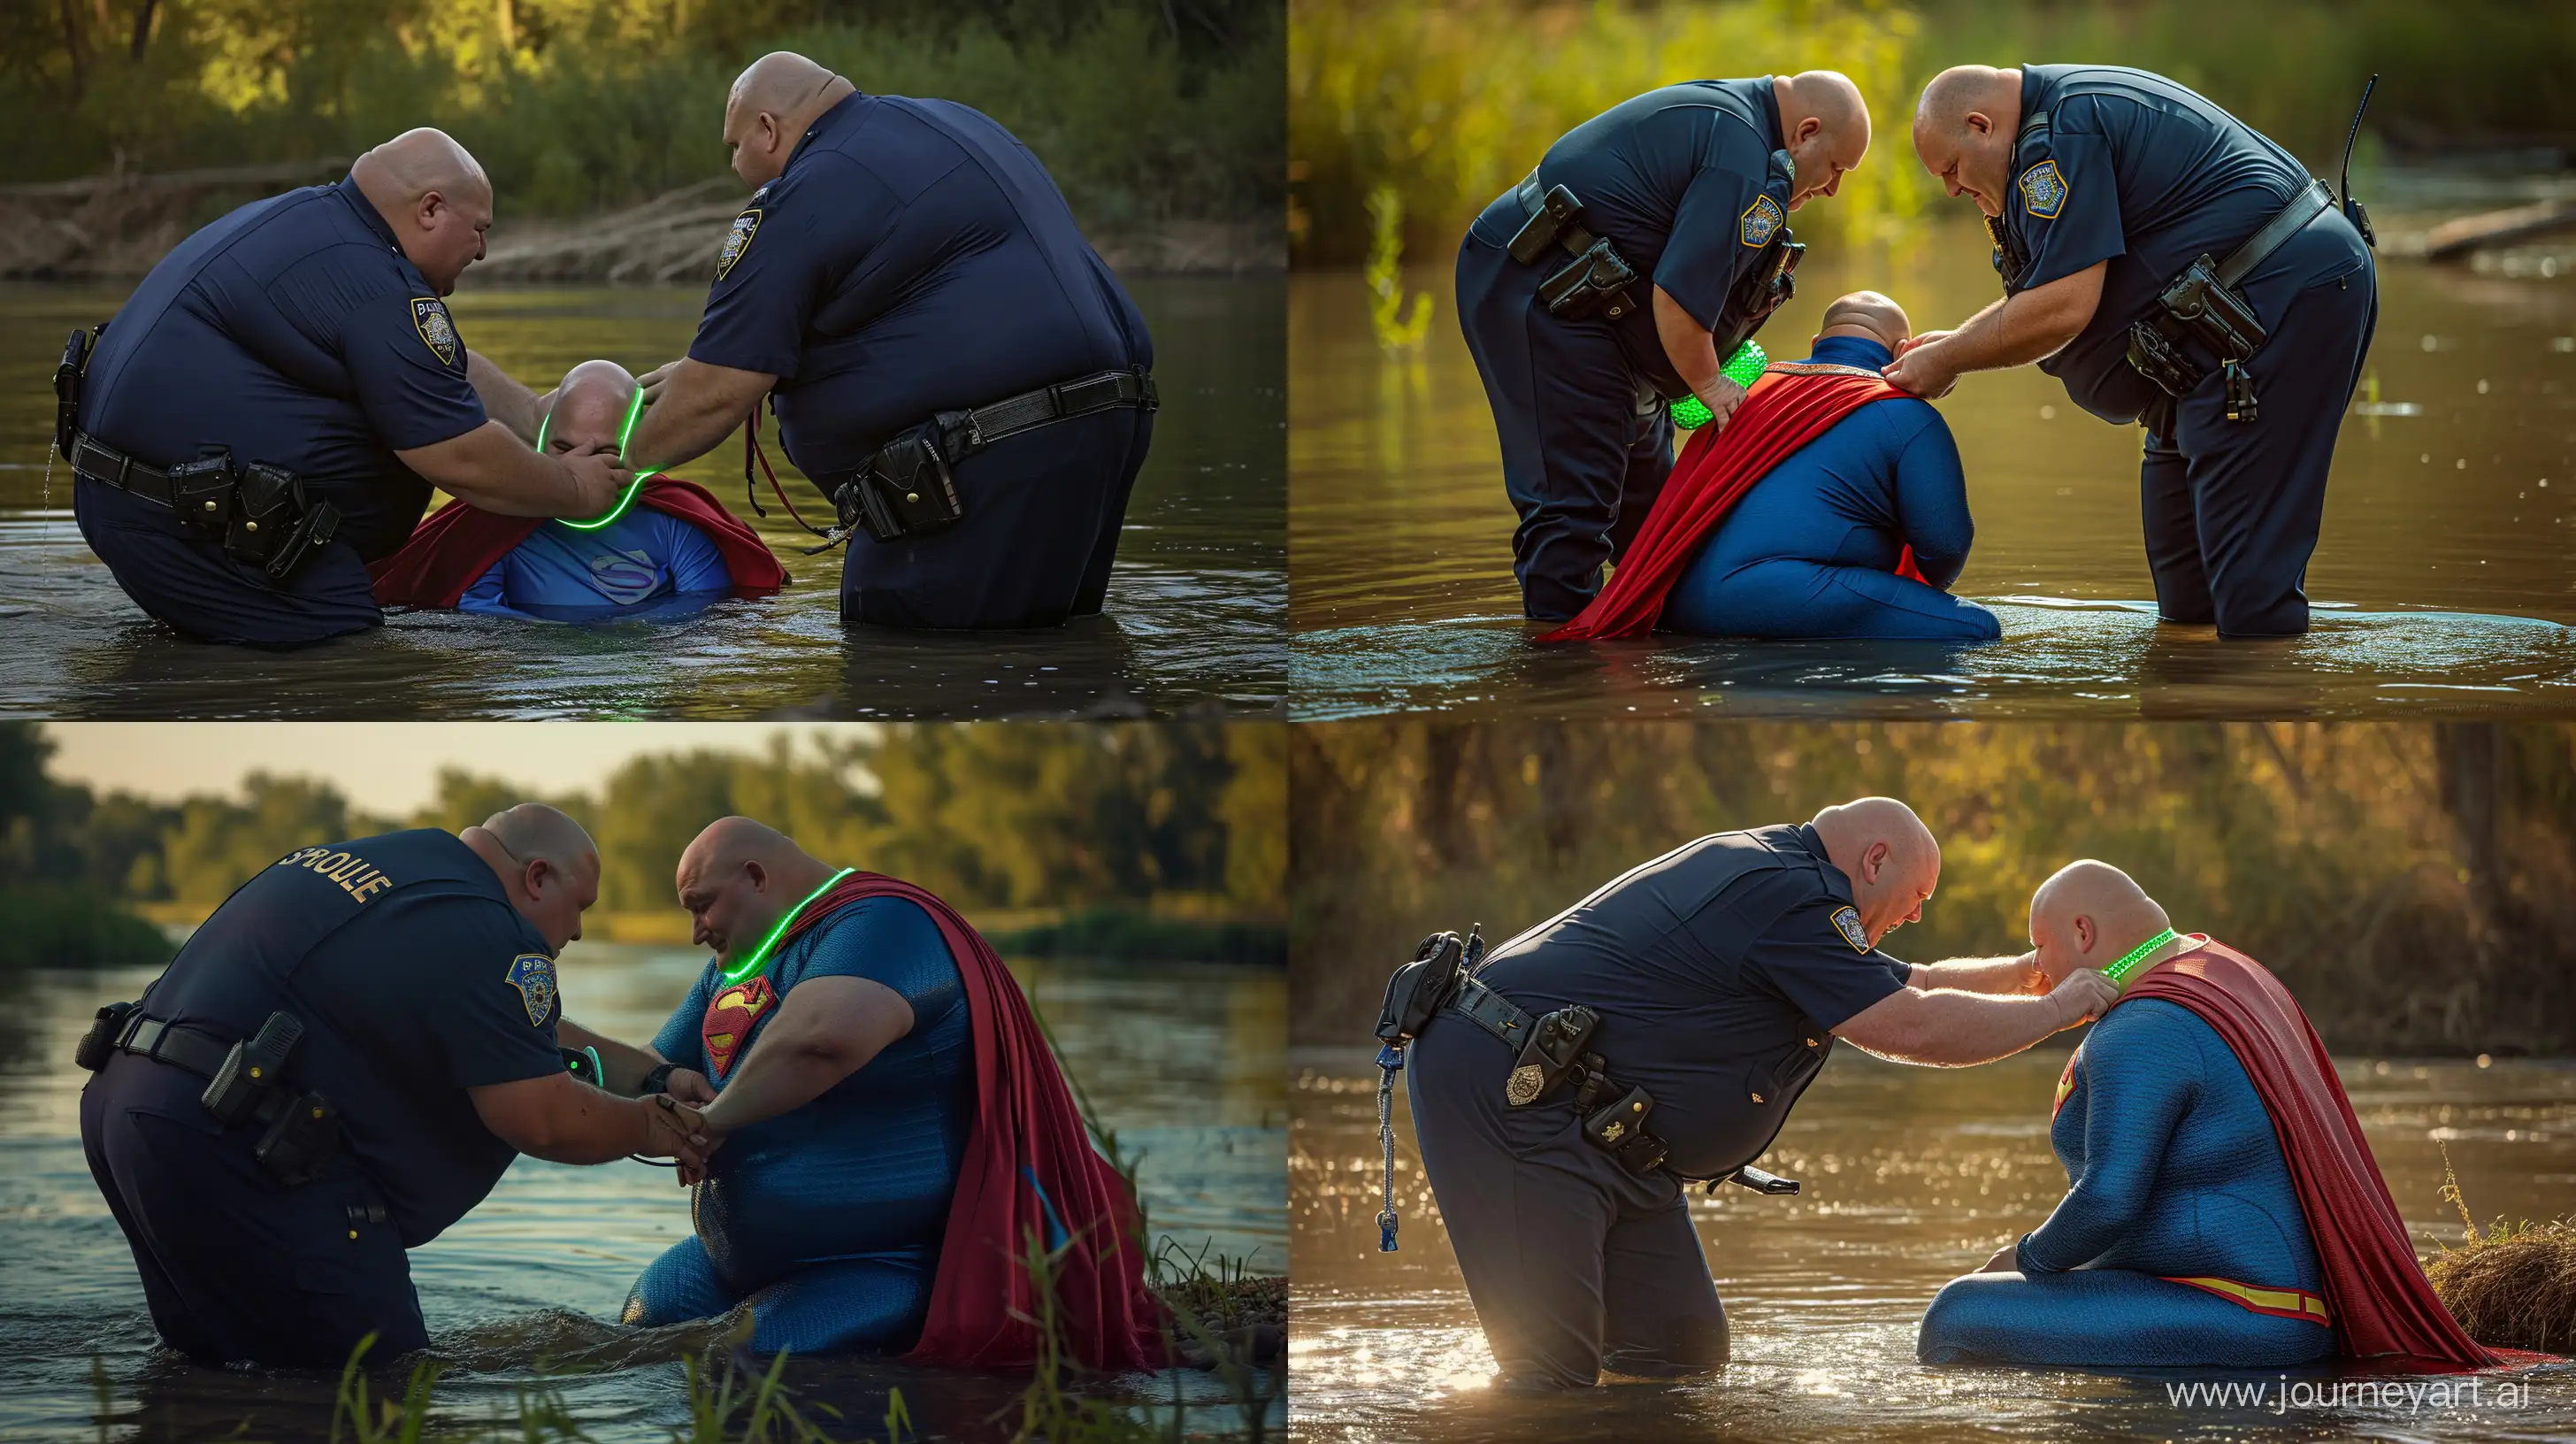 Elderly-Friends-Enjoying-Unique-Riverfront-Fun-with-Silky-Police-and-Superman-Elements